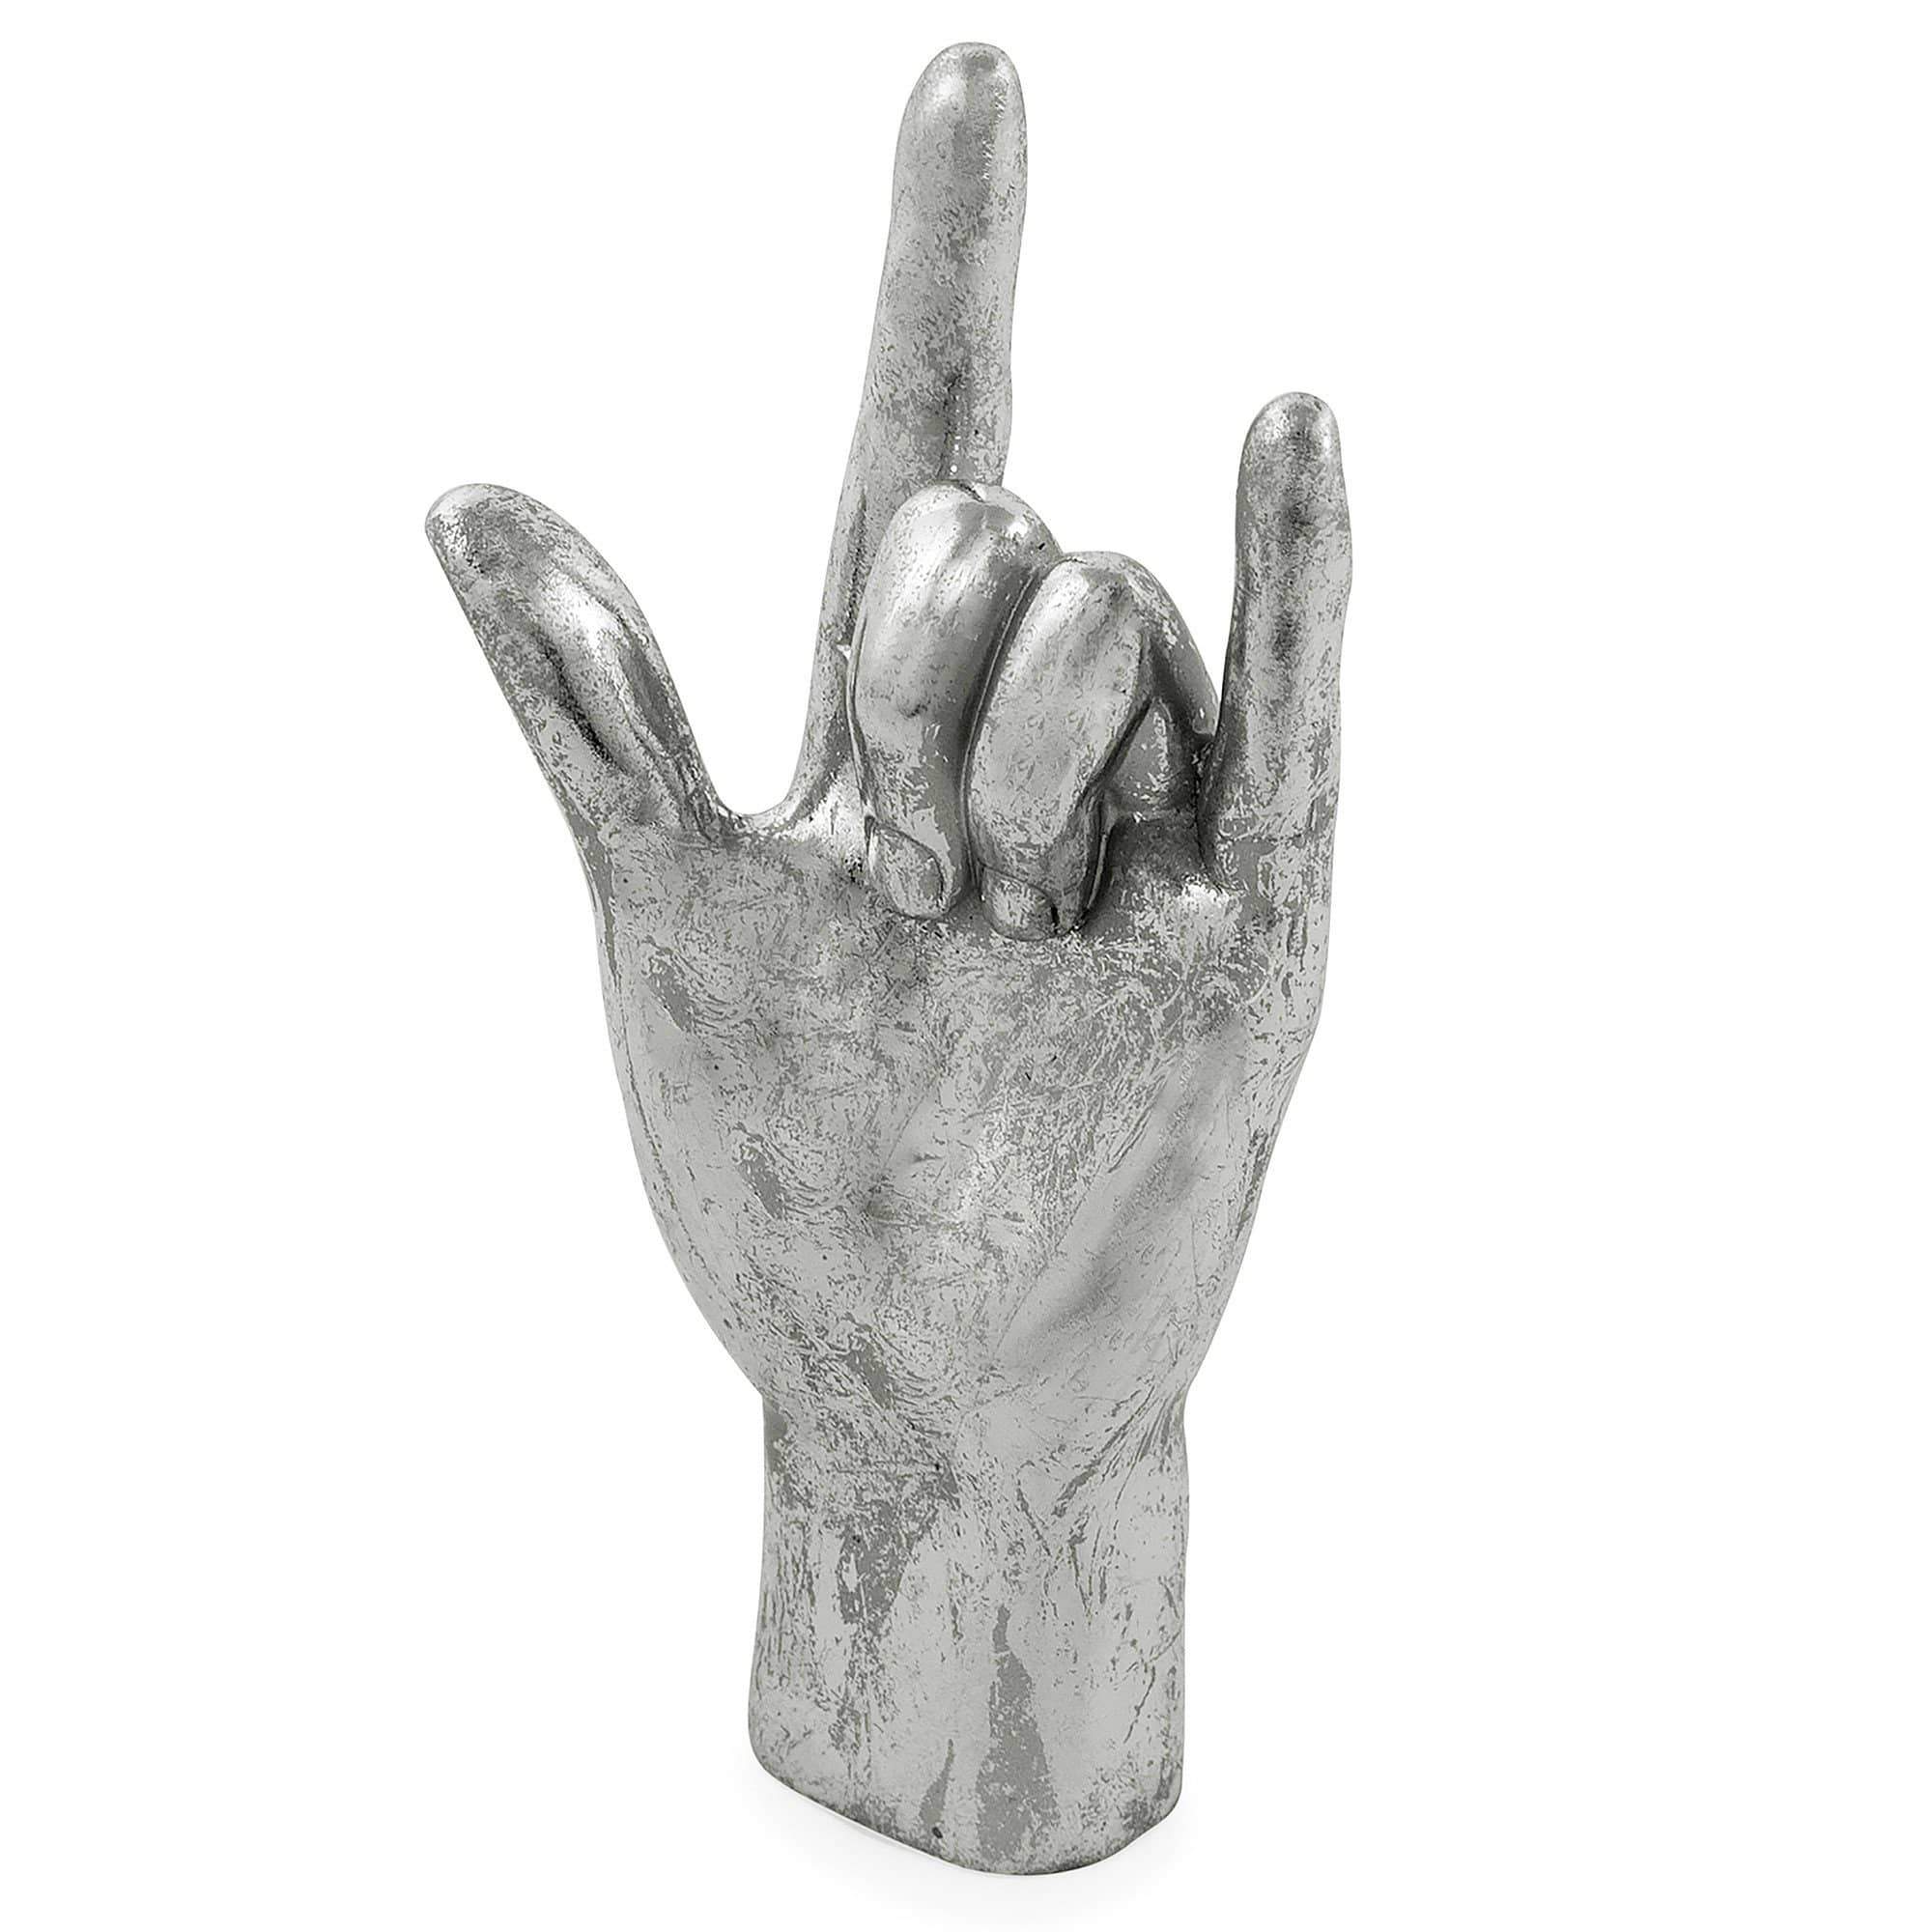 Silver 'Rock On!' Hand Ornament